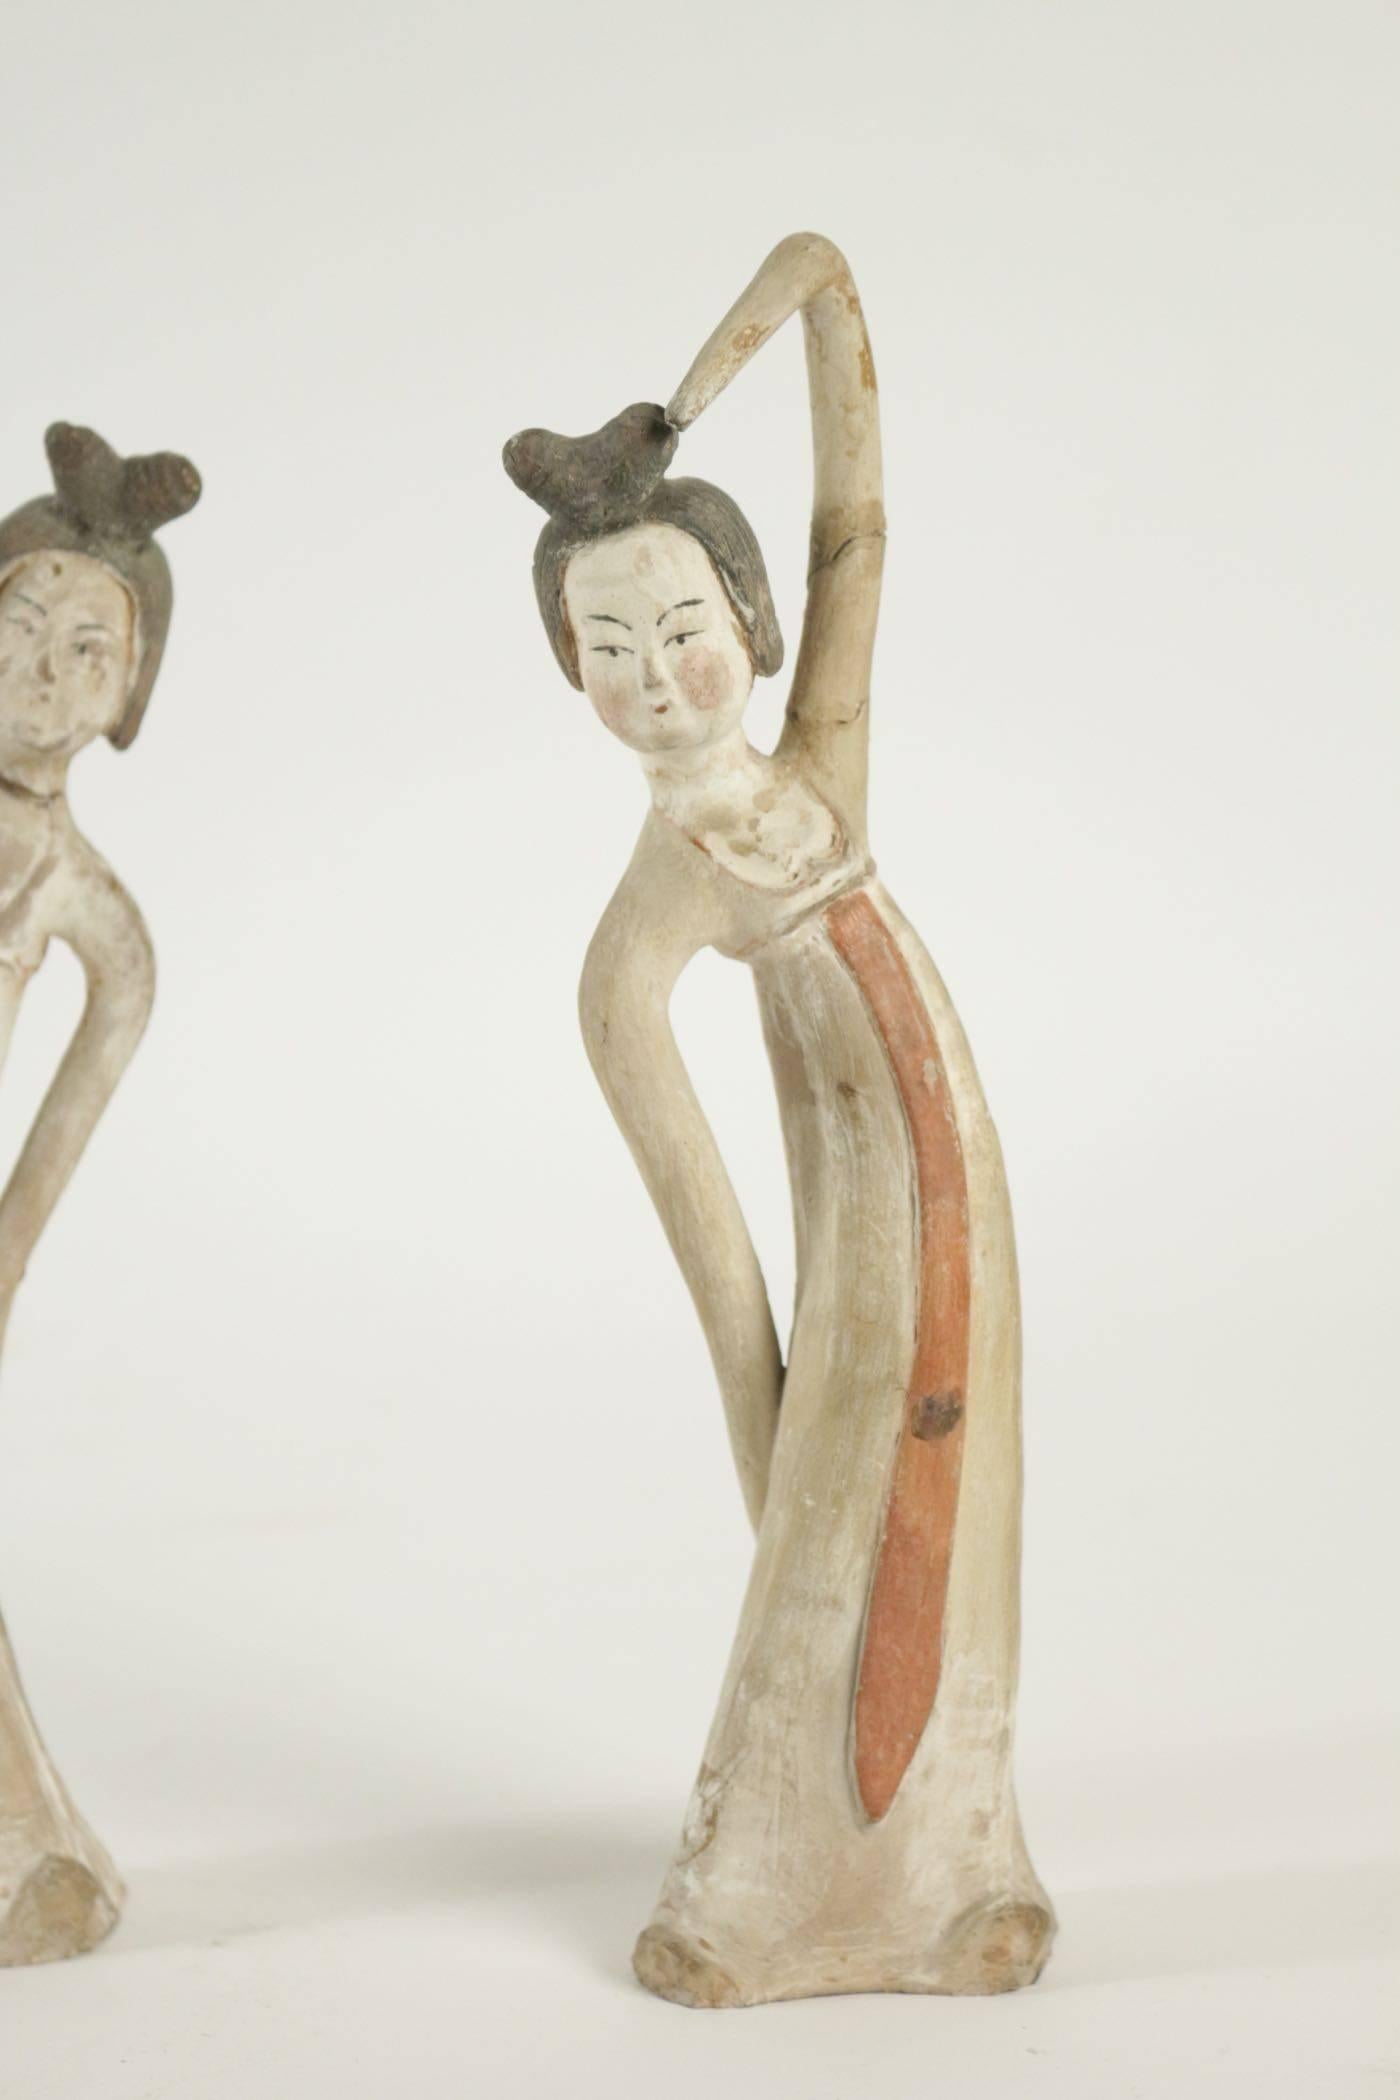 Two ancient dancer figurines in terracotta, Chinese, some restoration.
Measures: H 28cm, L 8cm, P 6cm.